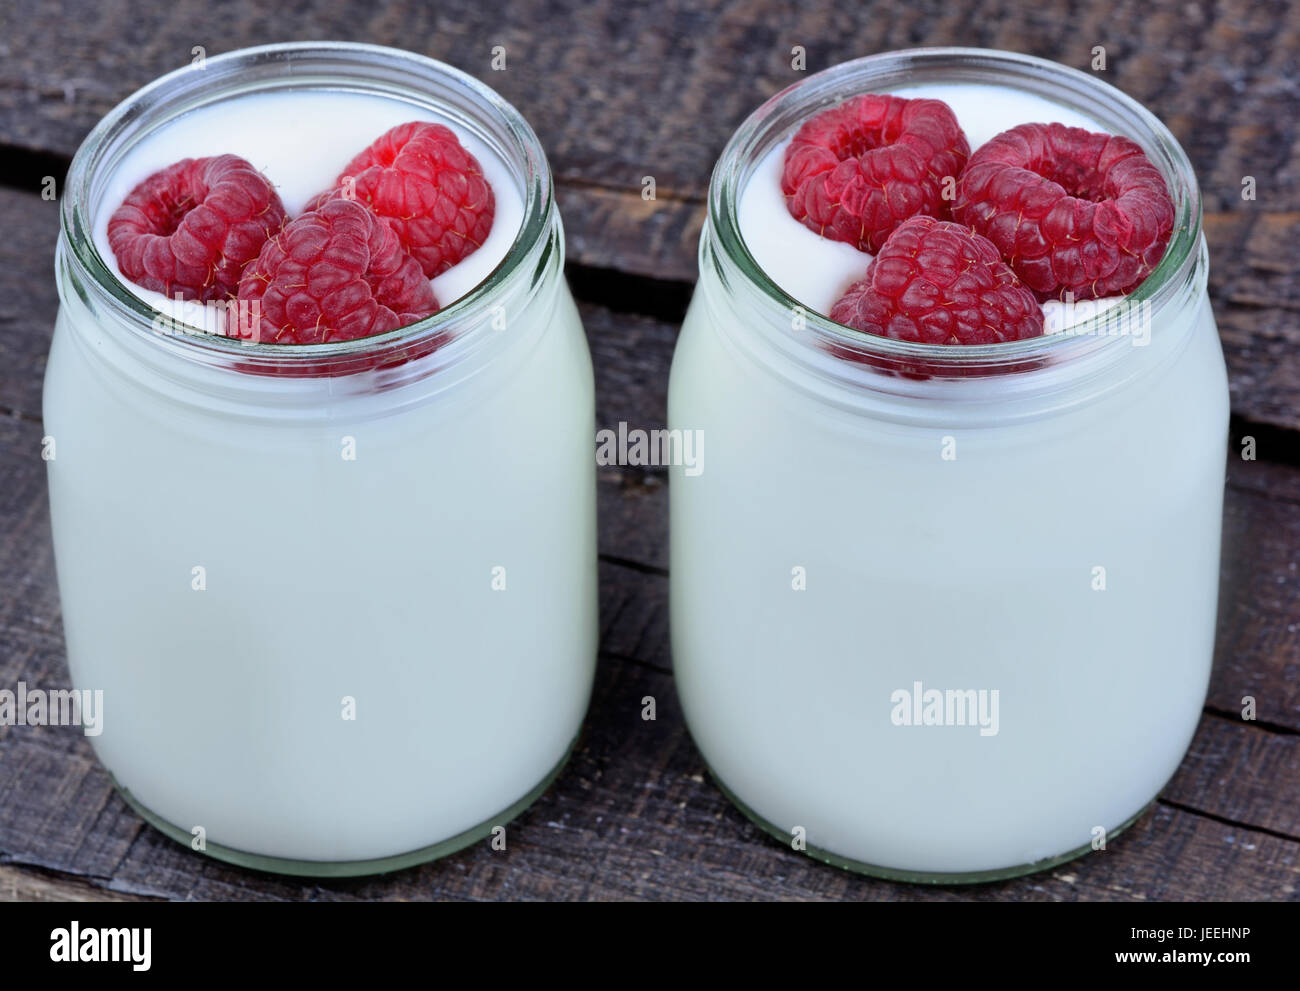 Raspberry with yogurt in a jars on table Stock Photo